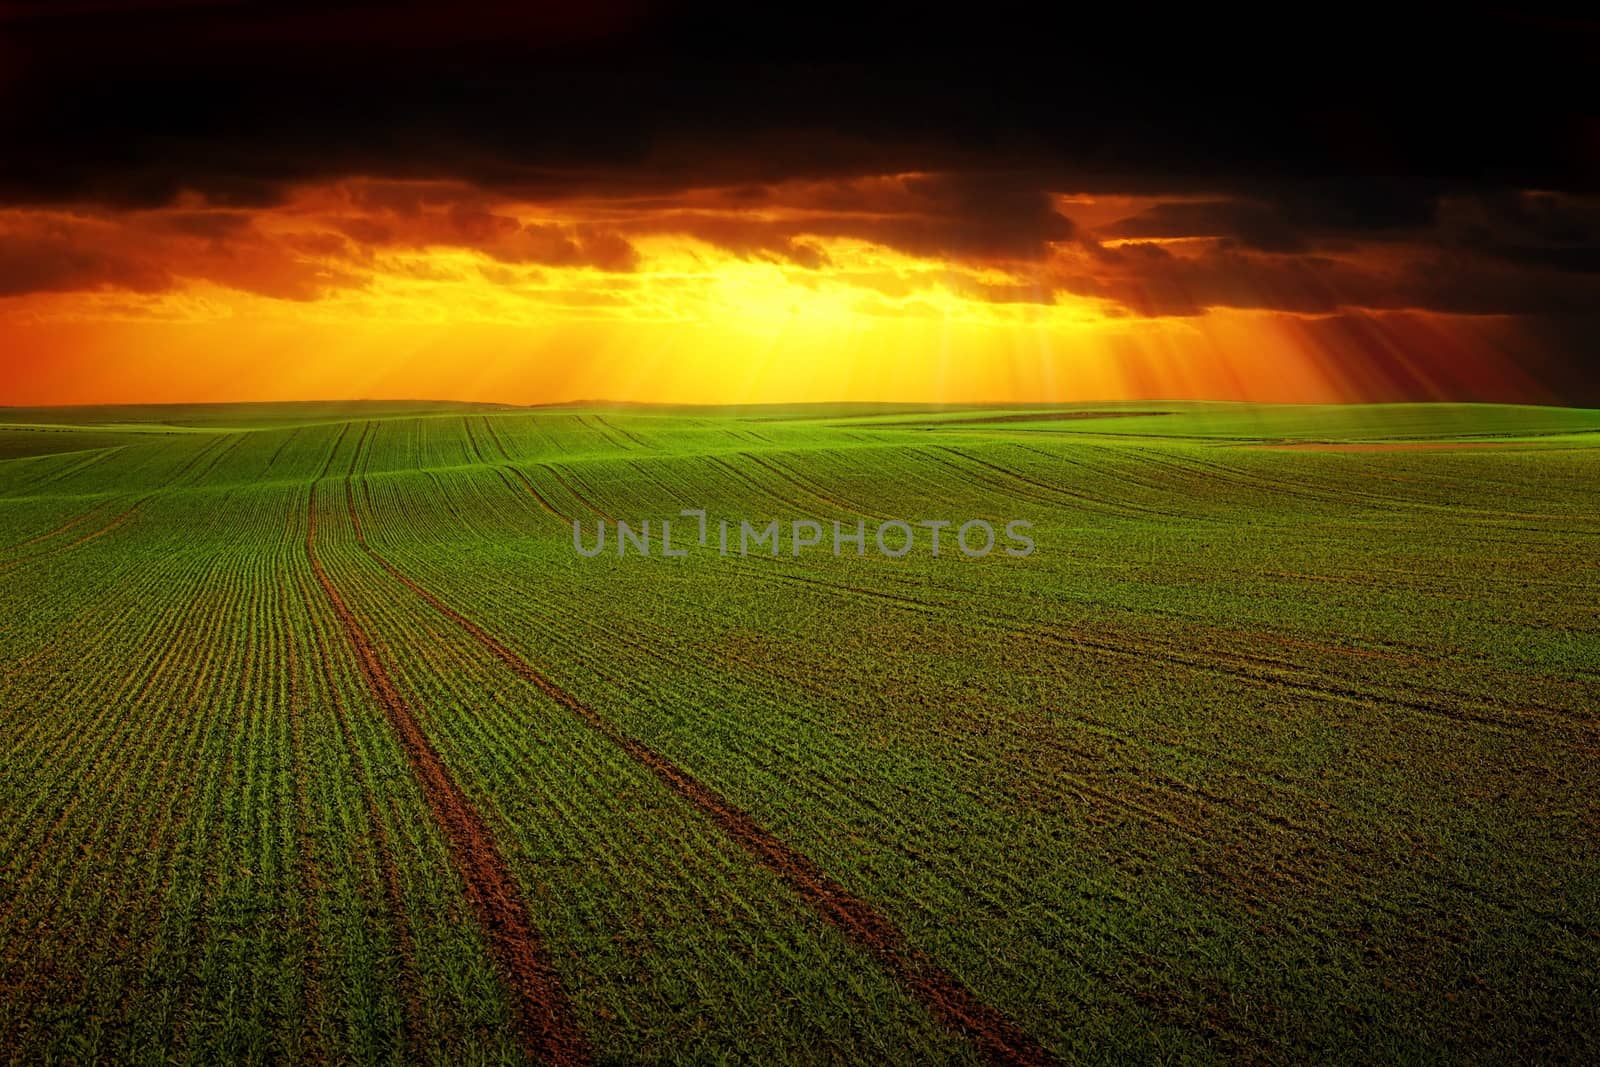 n images Storm dark clouds and light over field with green grass